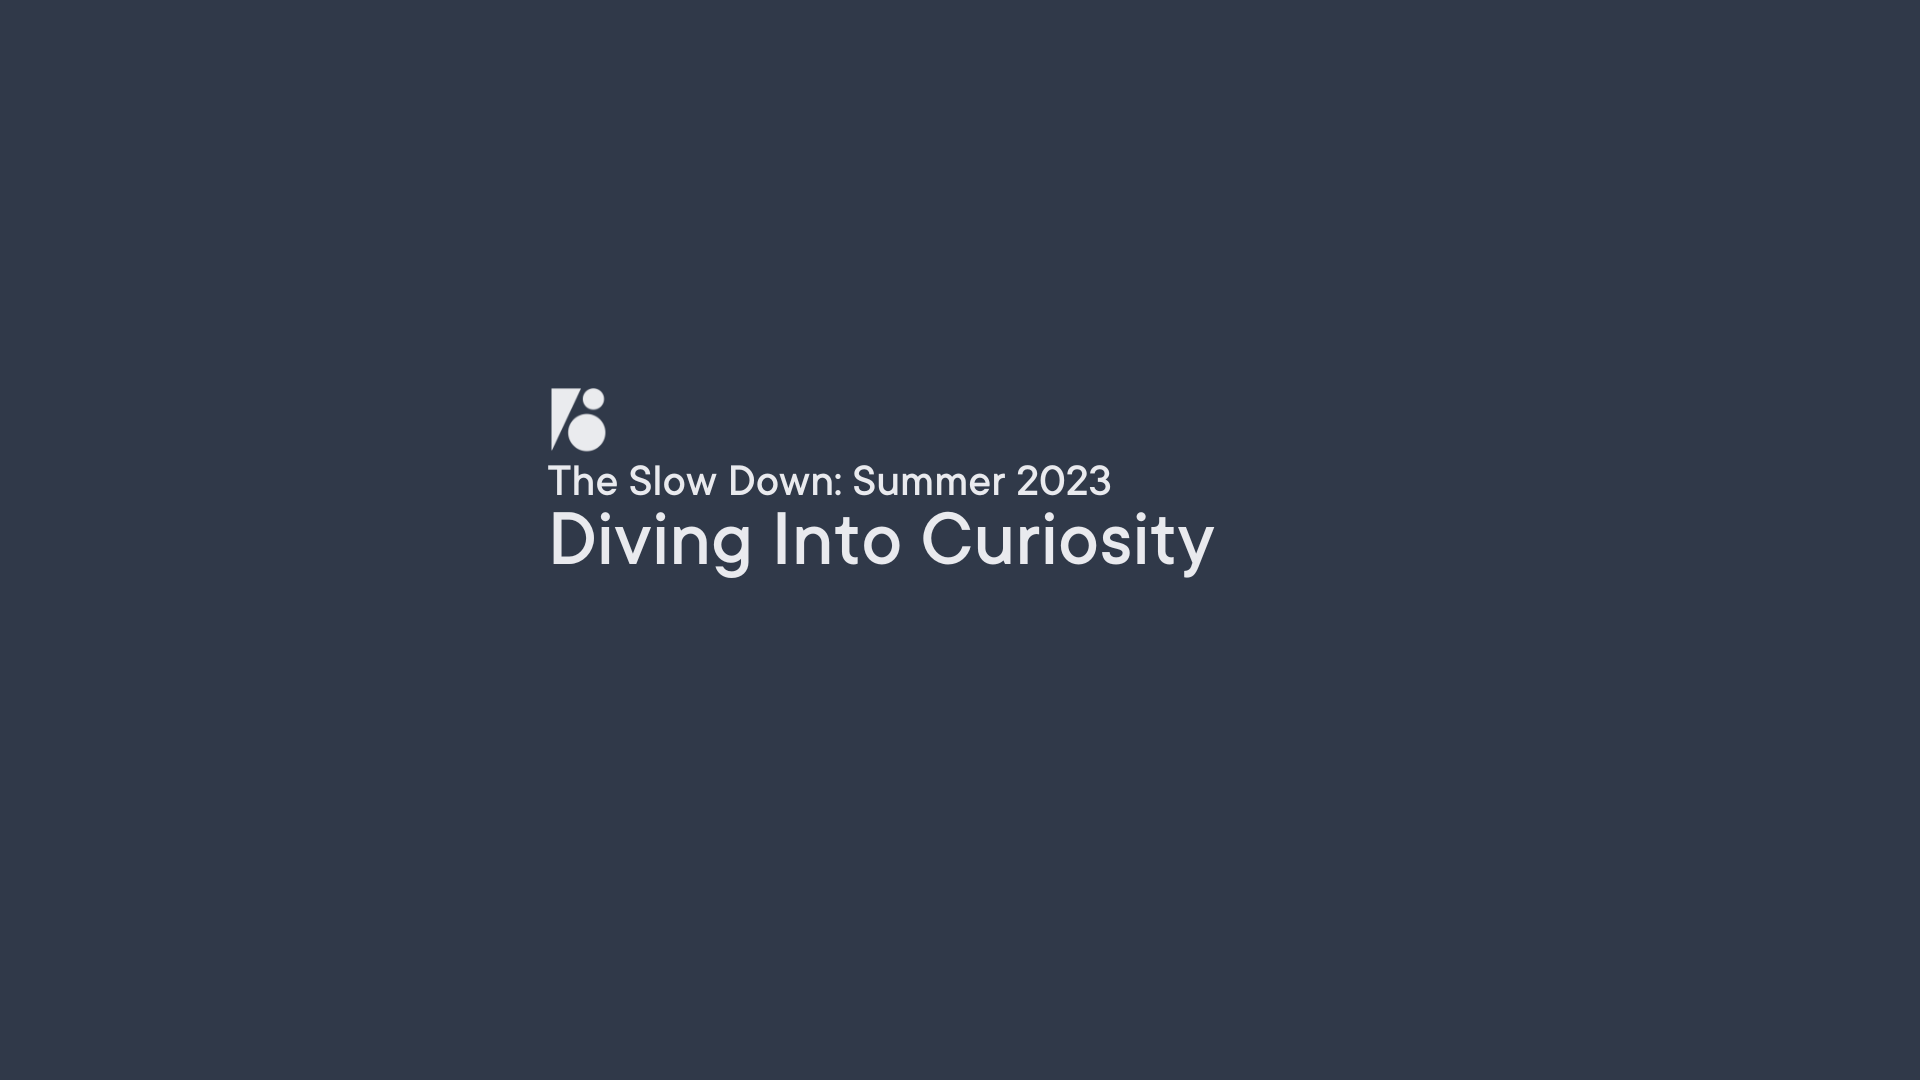 The Slow Down: Diving Into Curiousity